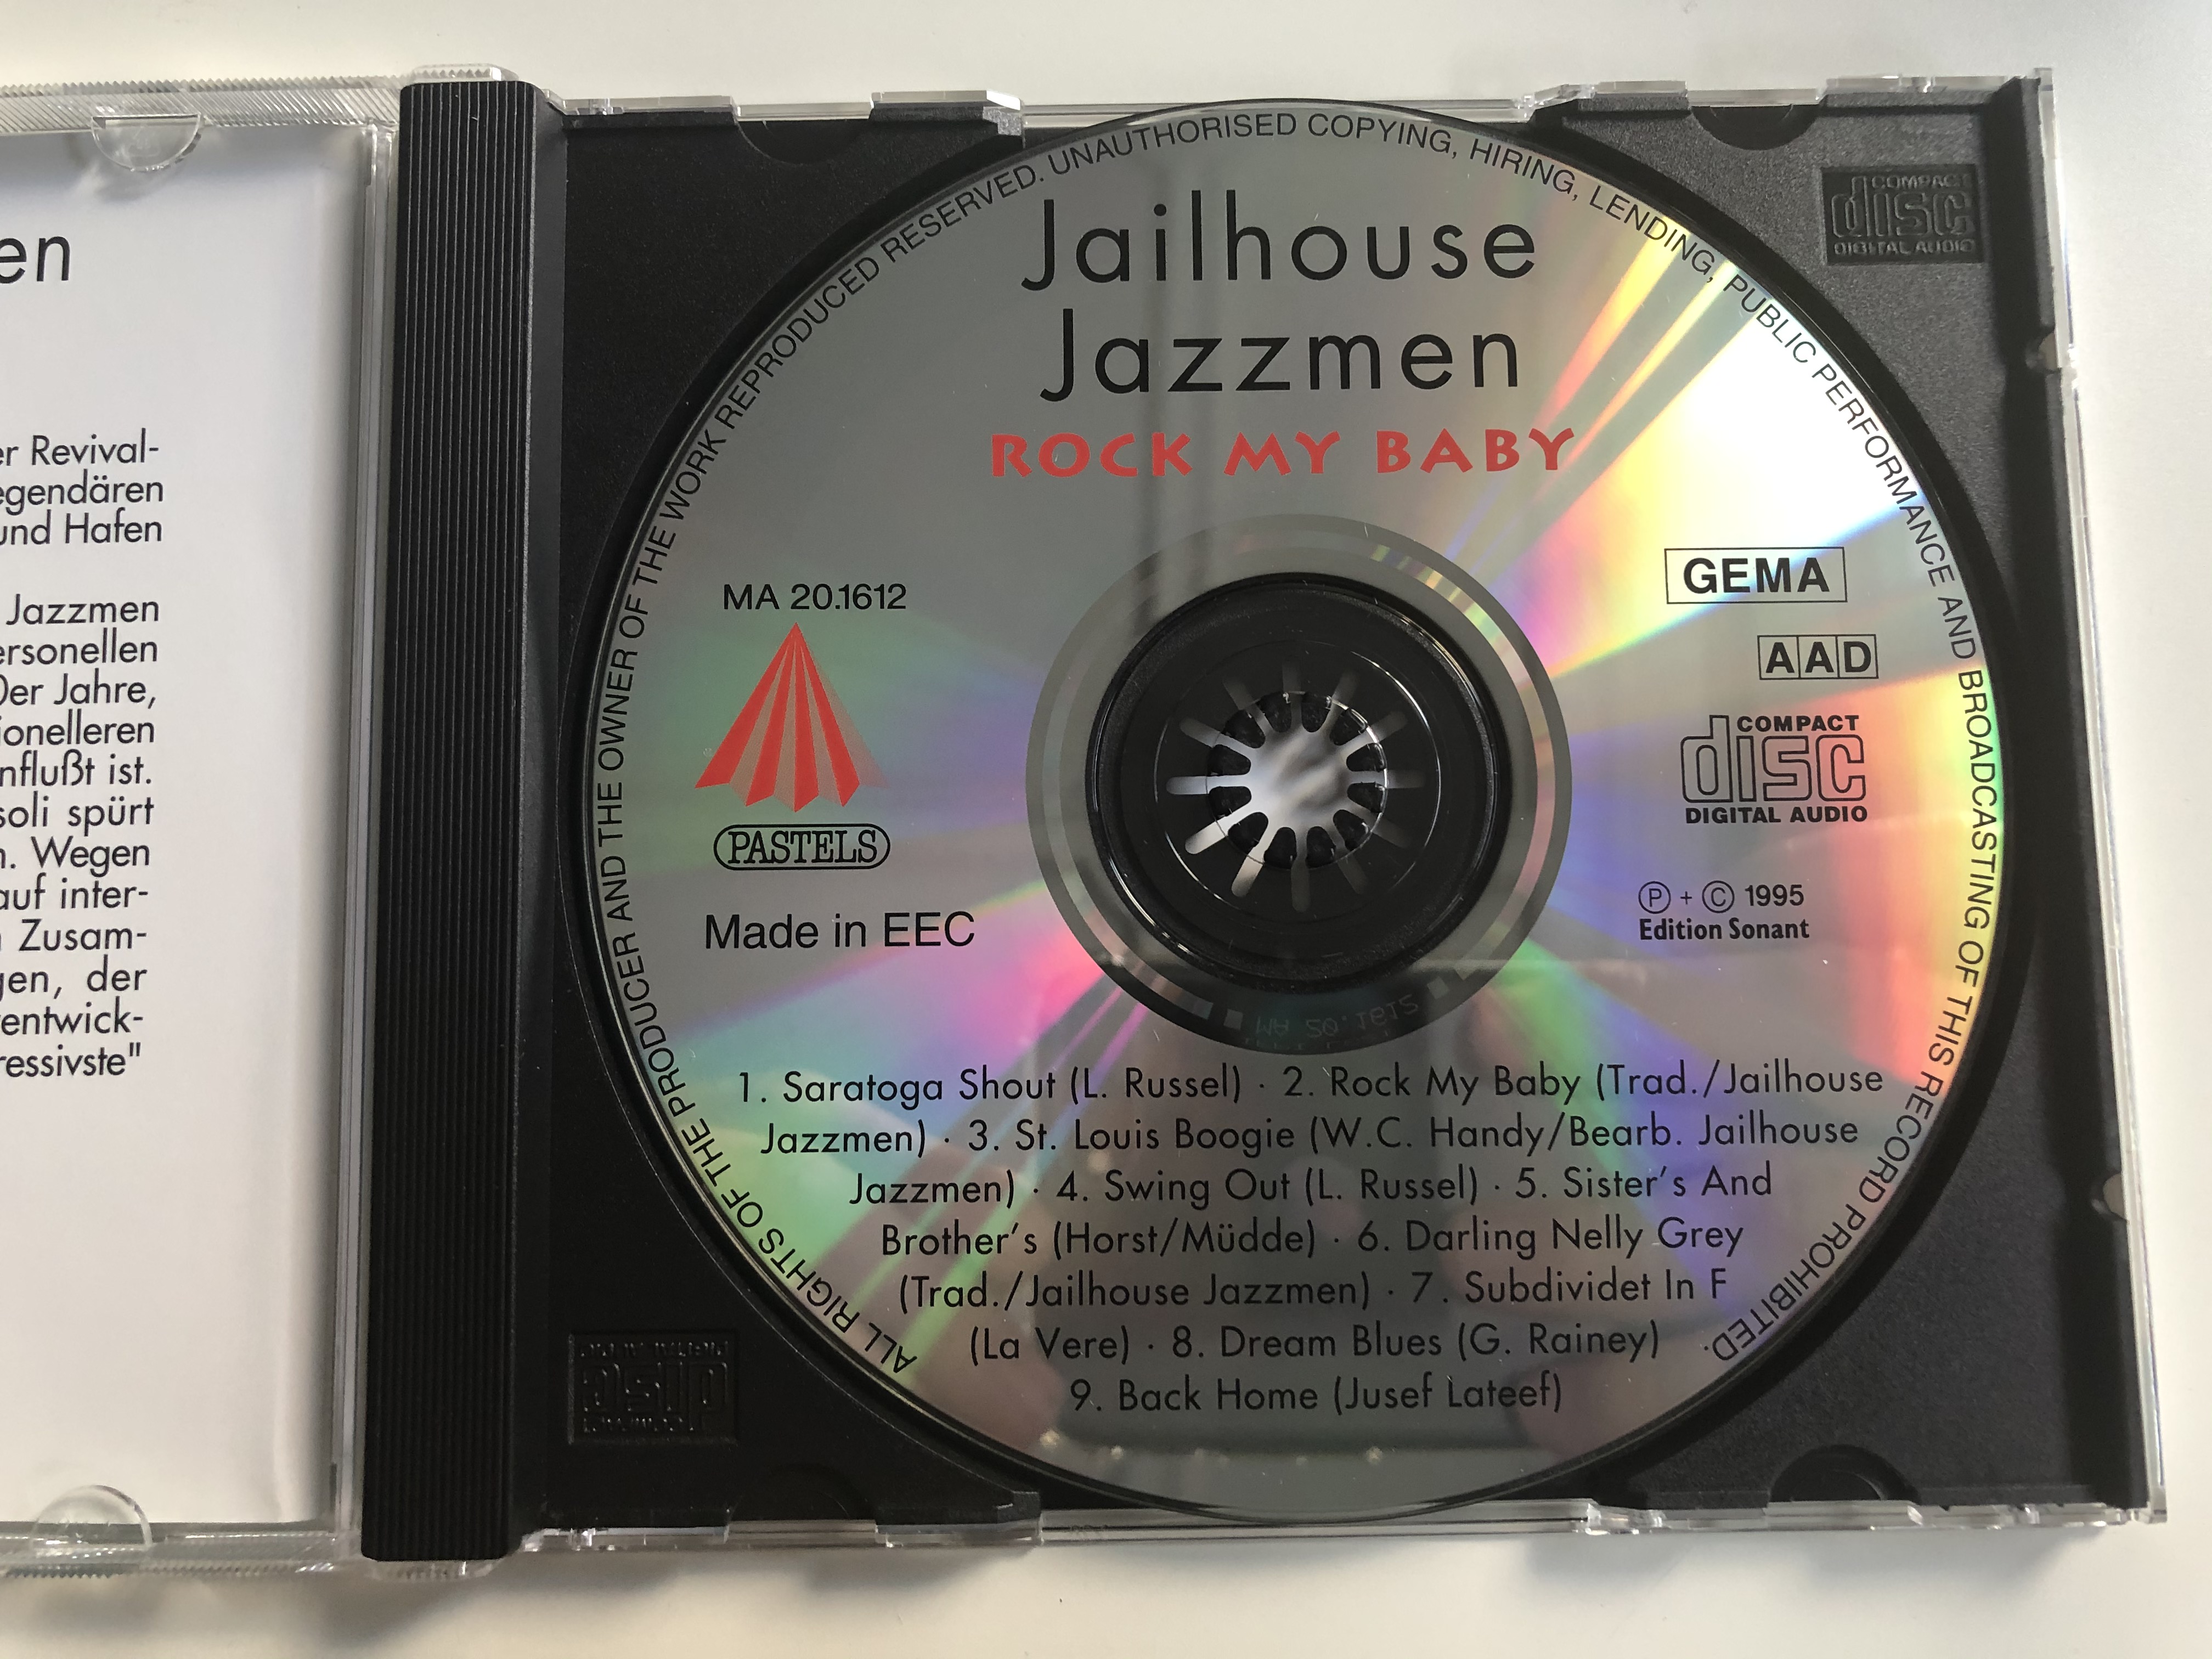 jailhouse-jazzmen-rock-my-baby-sister-s-and-brother-s-saratoga-shout-dream-blues-back-home-u.a.-digital-remastered-jazz-edition-pastels-audio-cd-1995-cd-20-3-.jpg